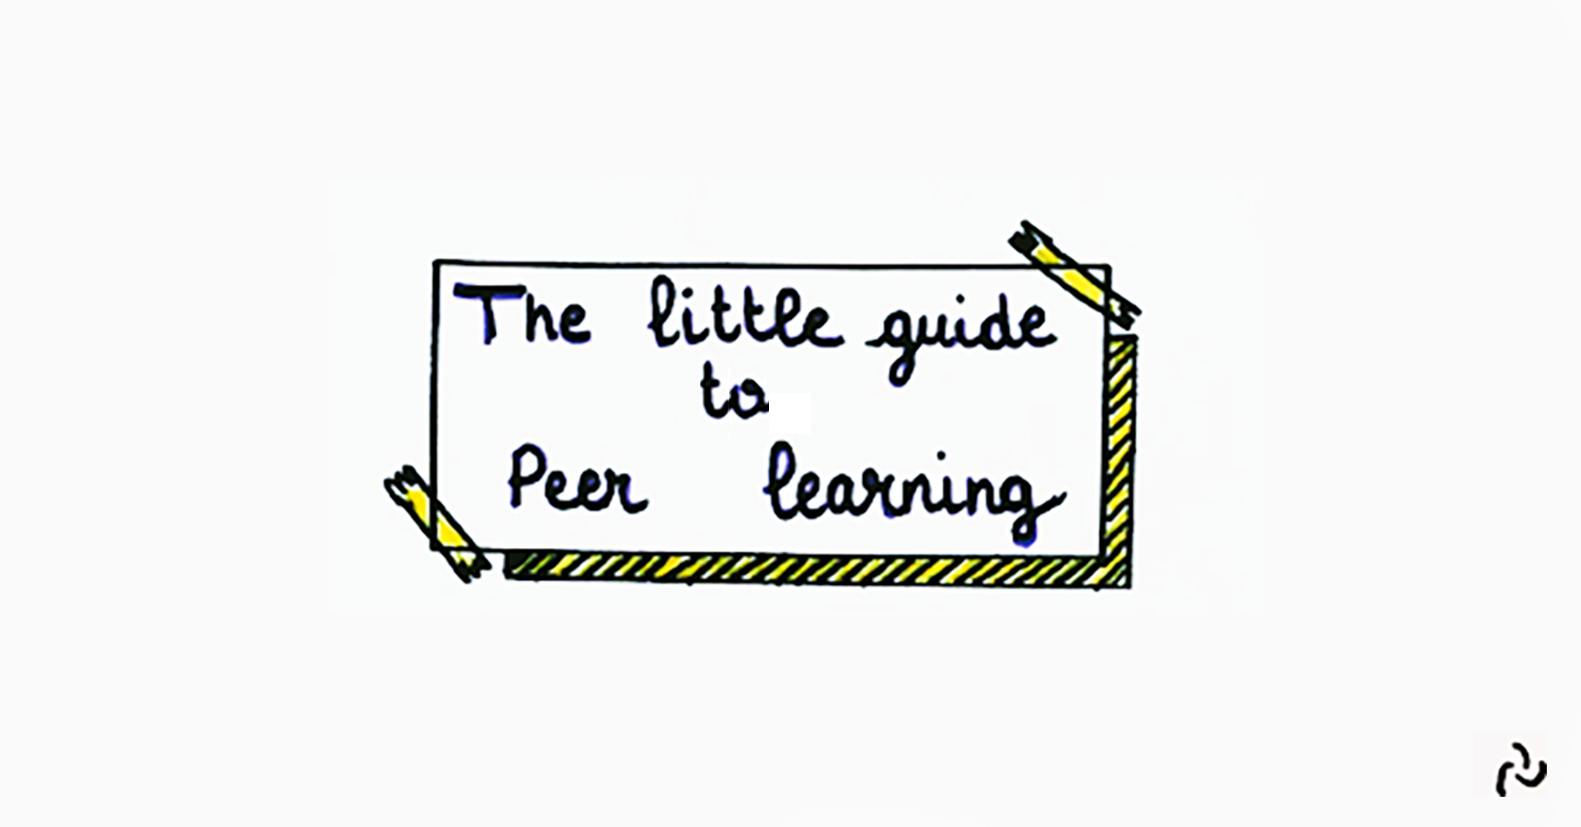 The Little Guide to Peer Learning